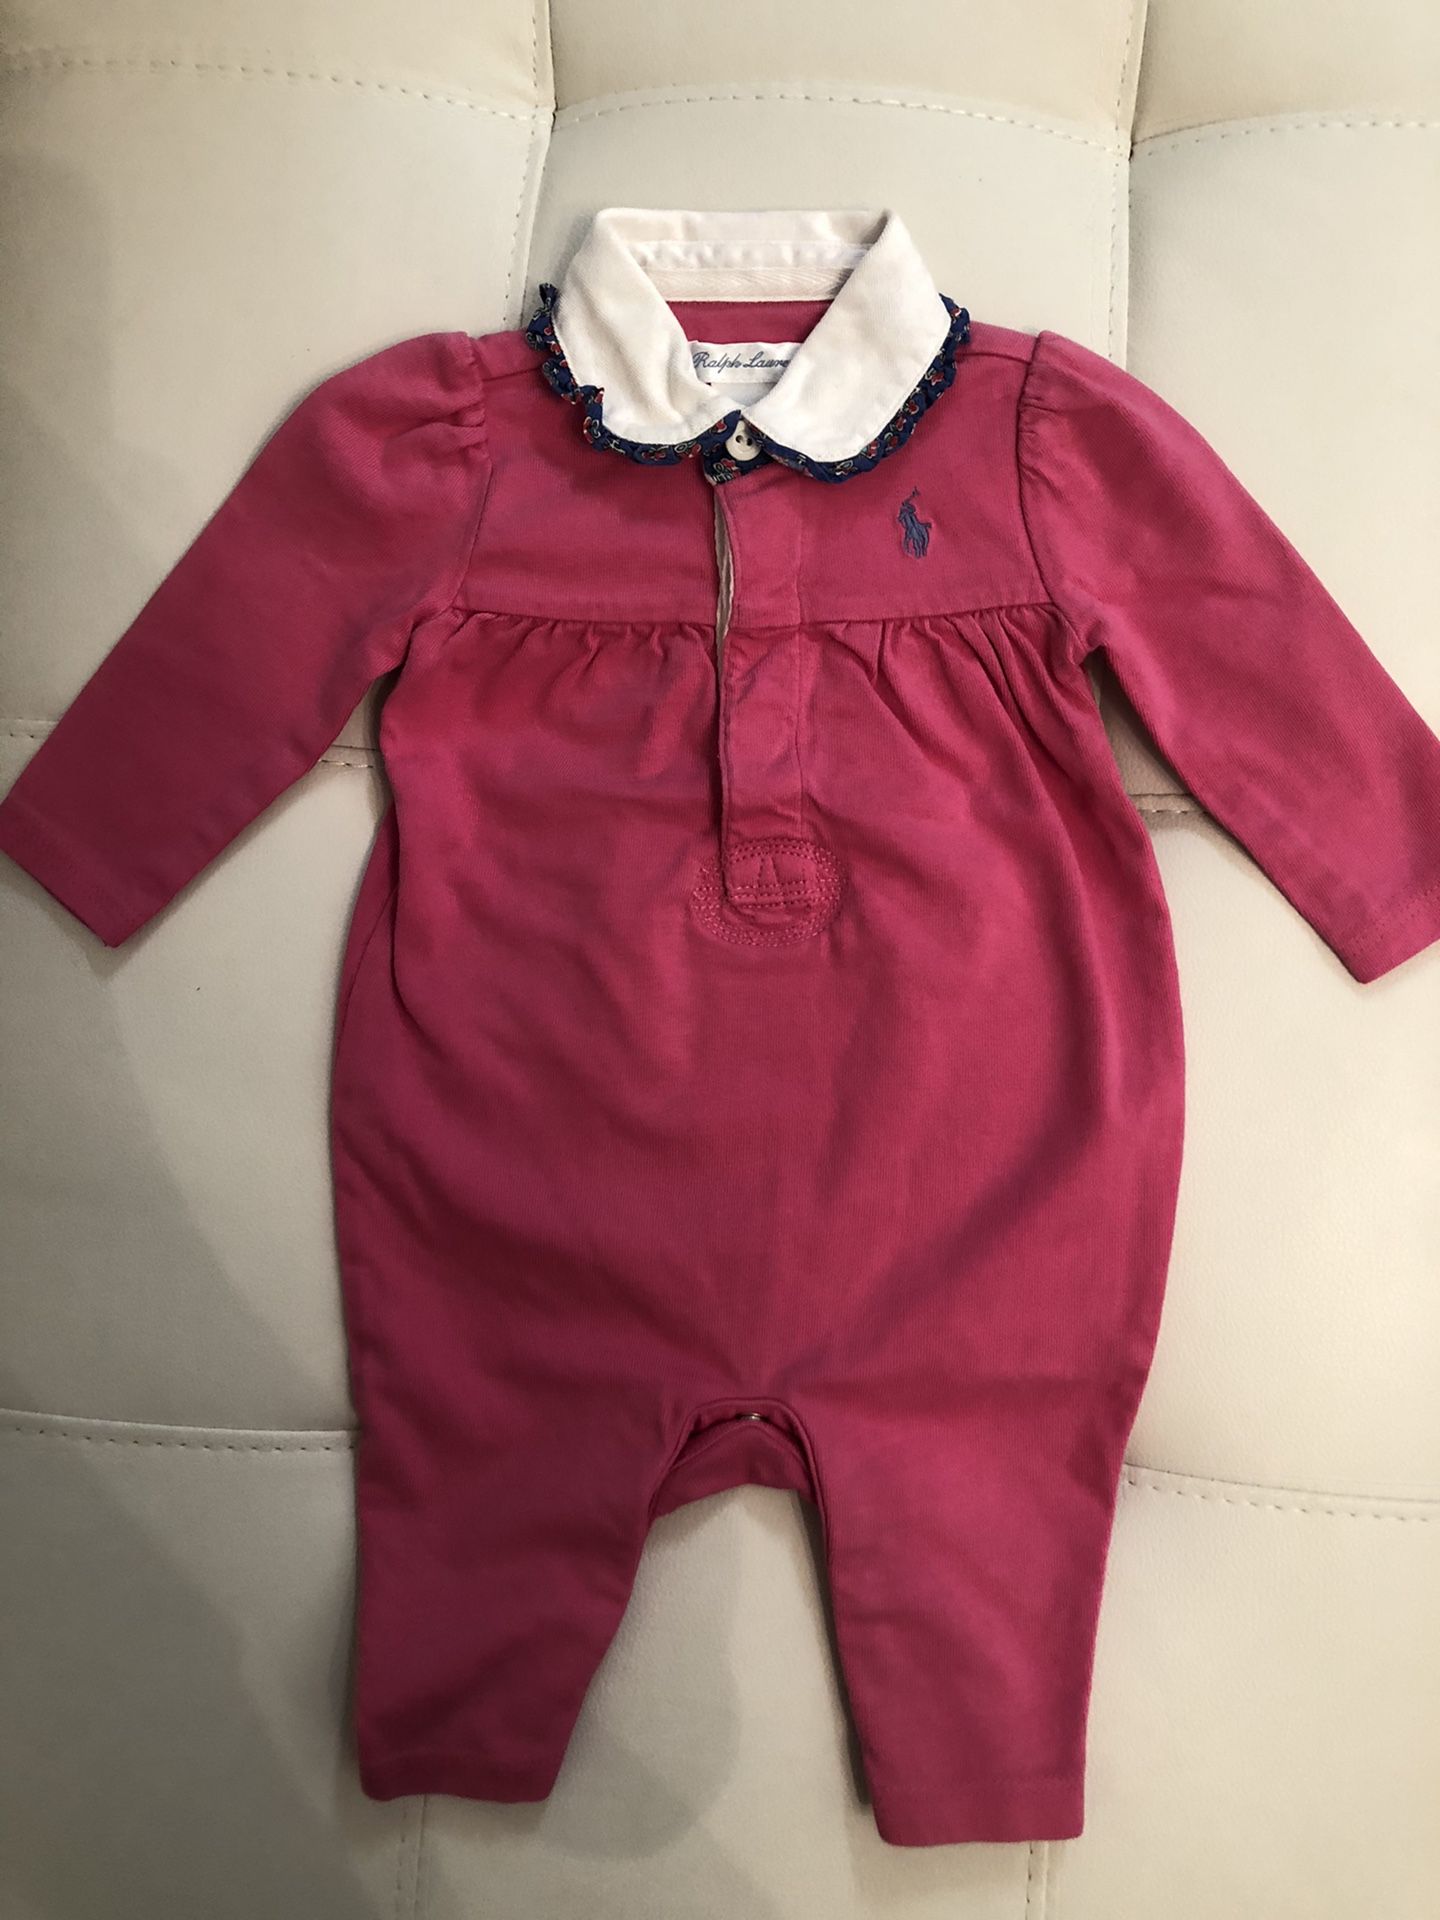 Ralph Laurent for 3months old baby girl